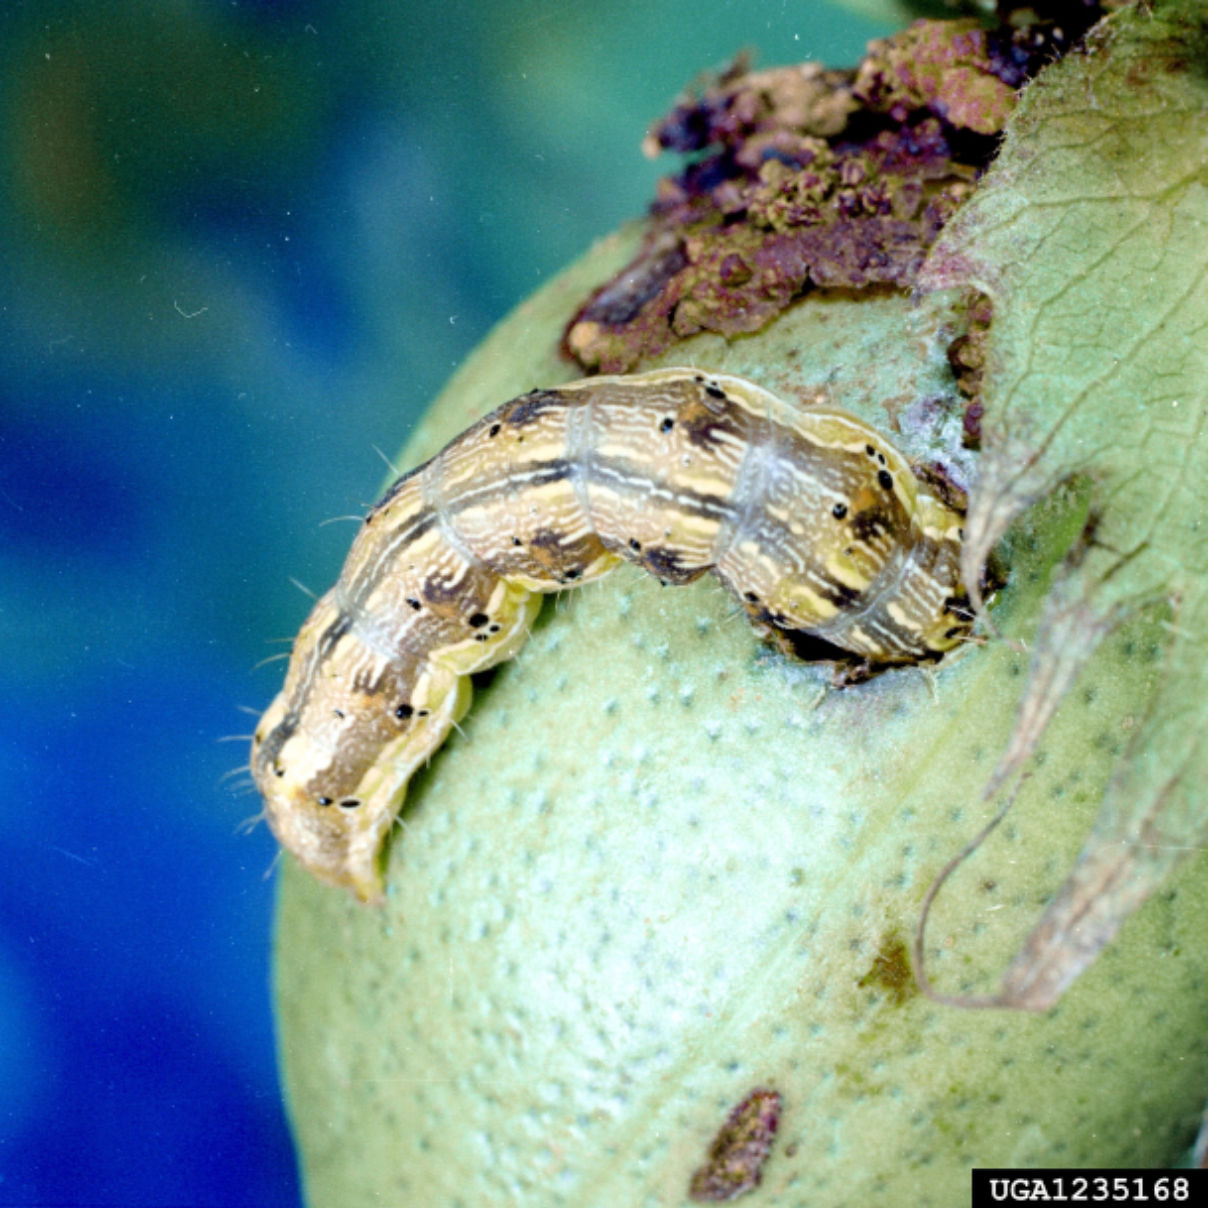 Figure 3. Bollworm damaging a boll. Image courtesy of Clemson University— USDA Cooperative Extension Slide Series, Bugwood.org.